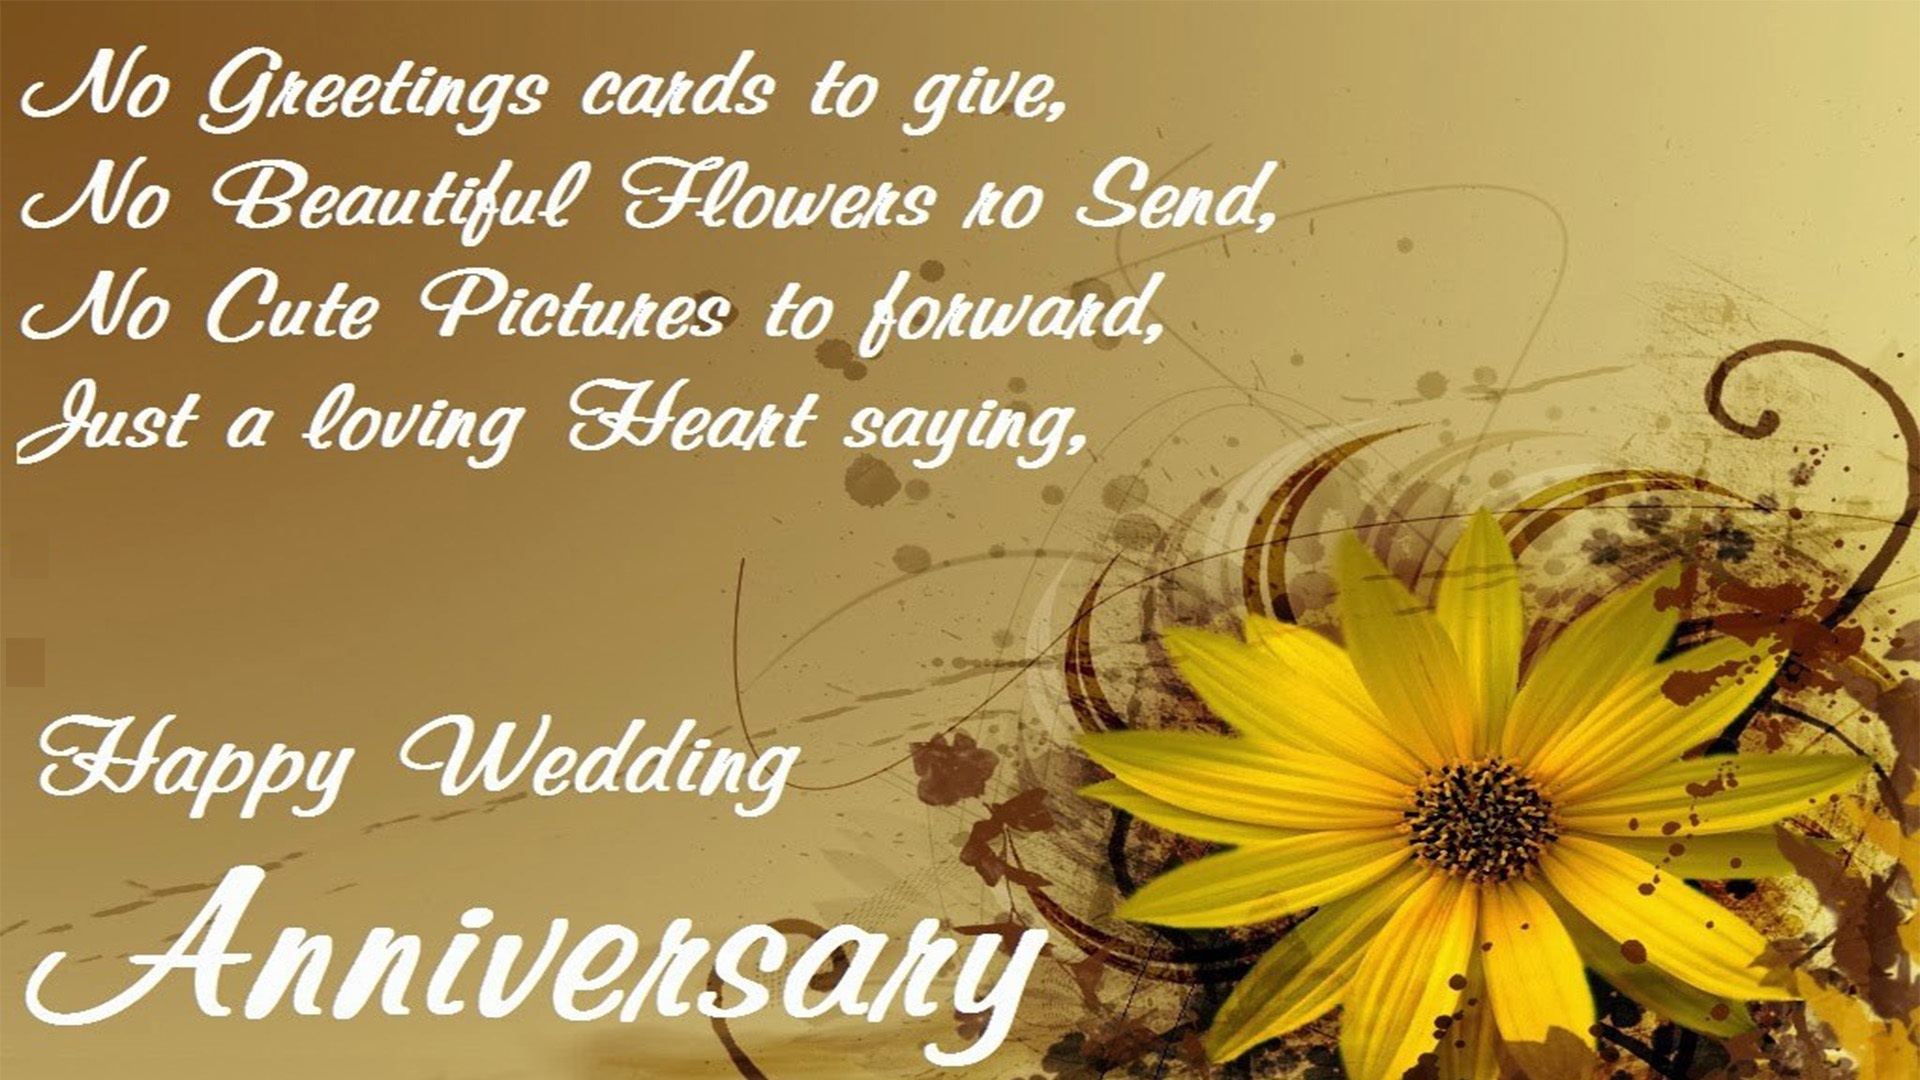 Marriage Anniversary Wishes Images & Pictures | Anniversary Greetings